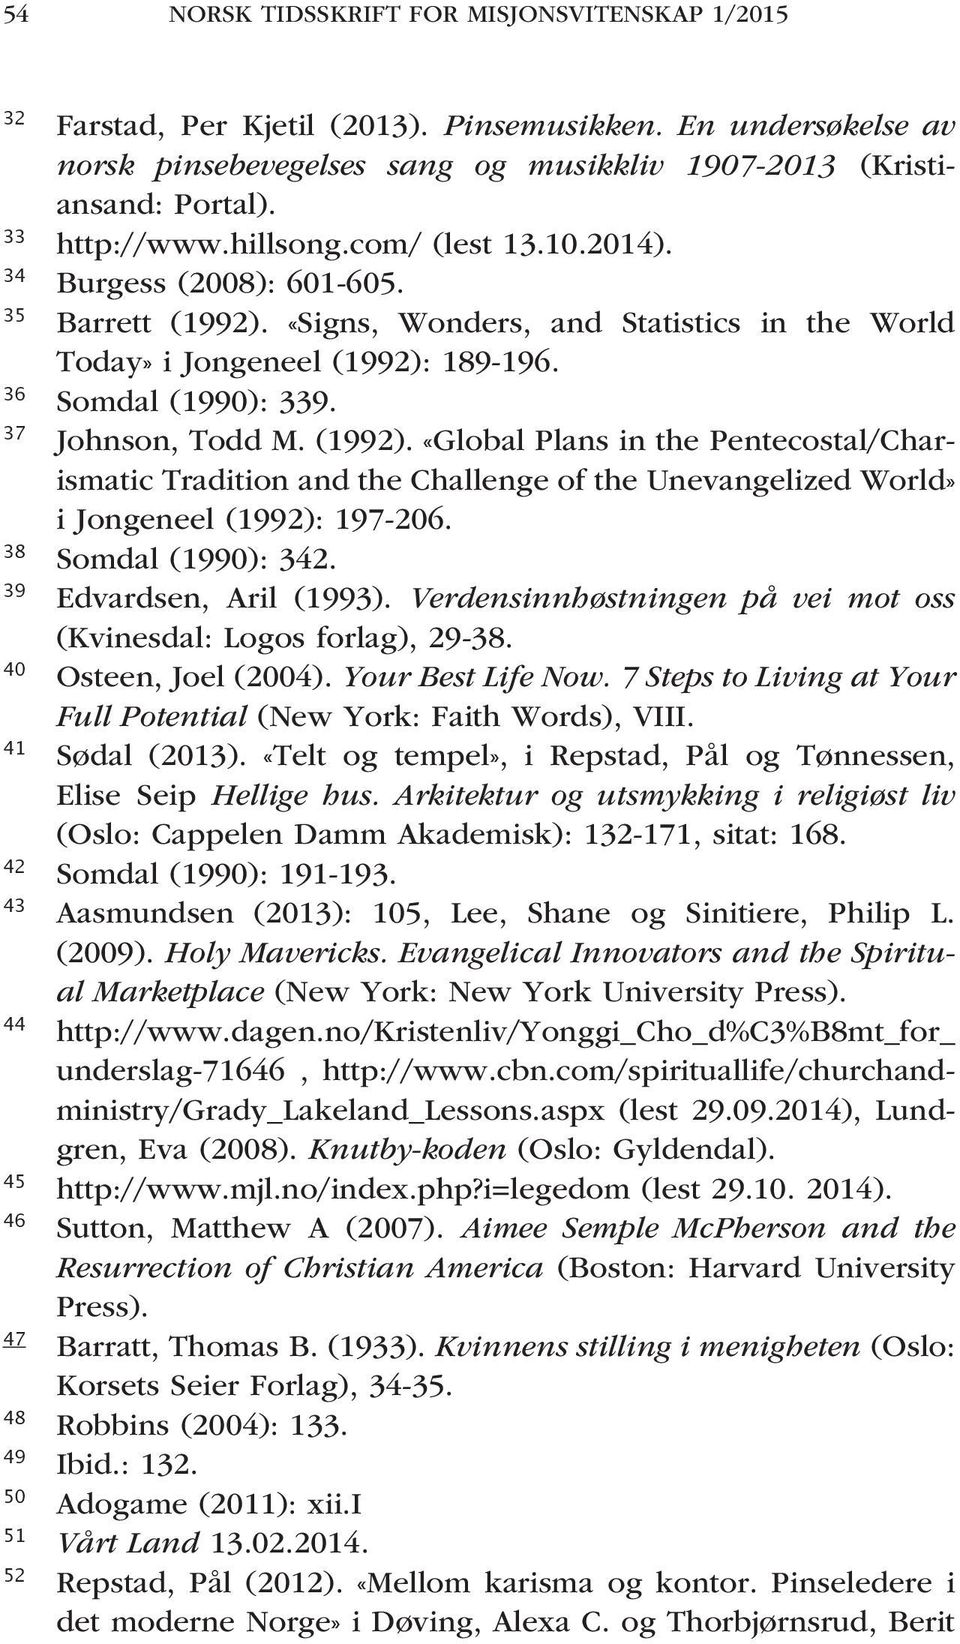 37 Johnson, Todd M. (1992). «Global Plans in the Pentecostal/Charismatic Tradition and the Challenge of the Unevangelized World» i Jongeneel (1992): 197-206. 38 Somdal (1990): 342.